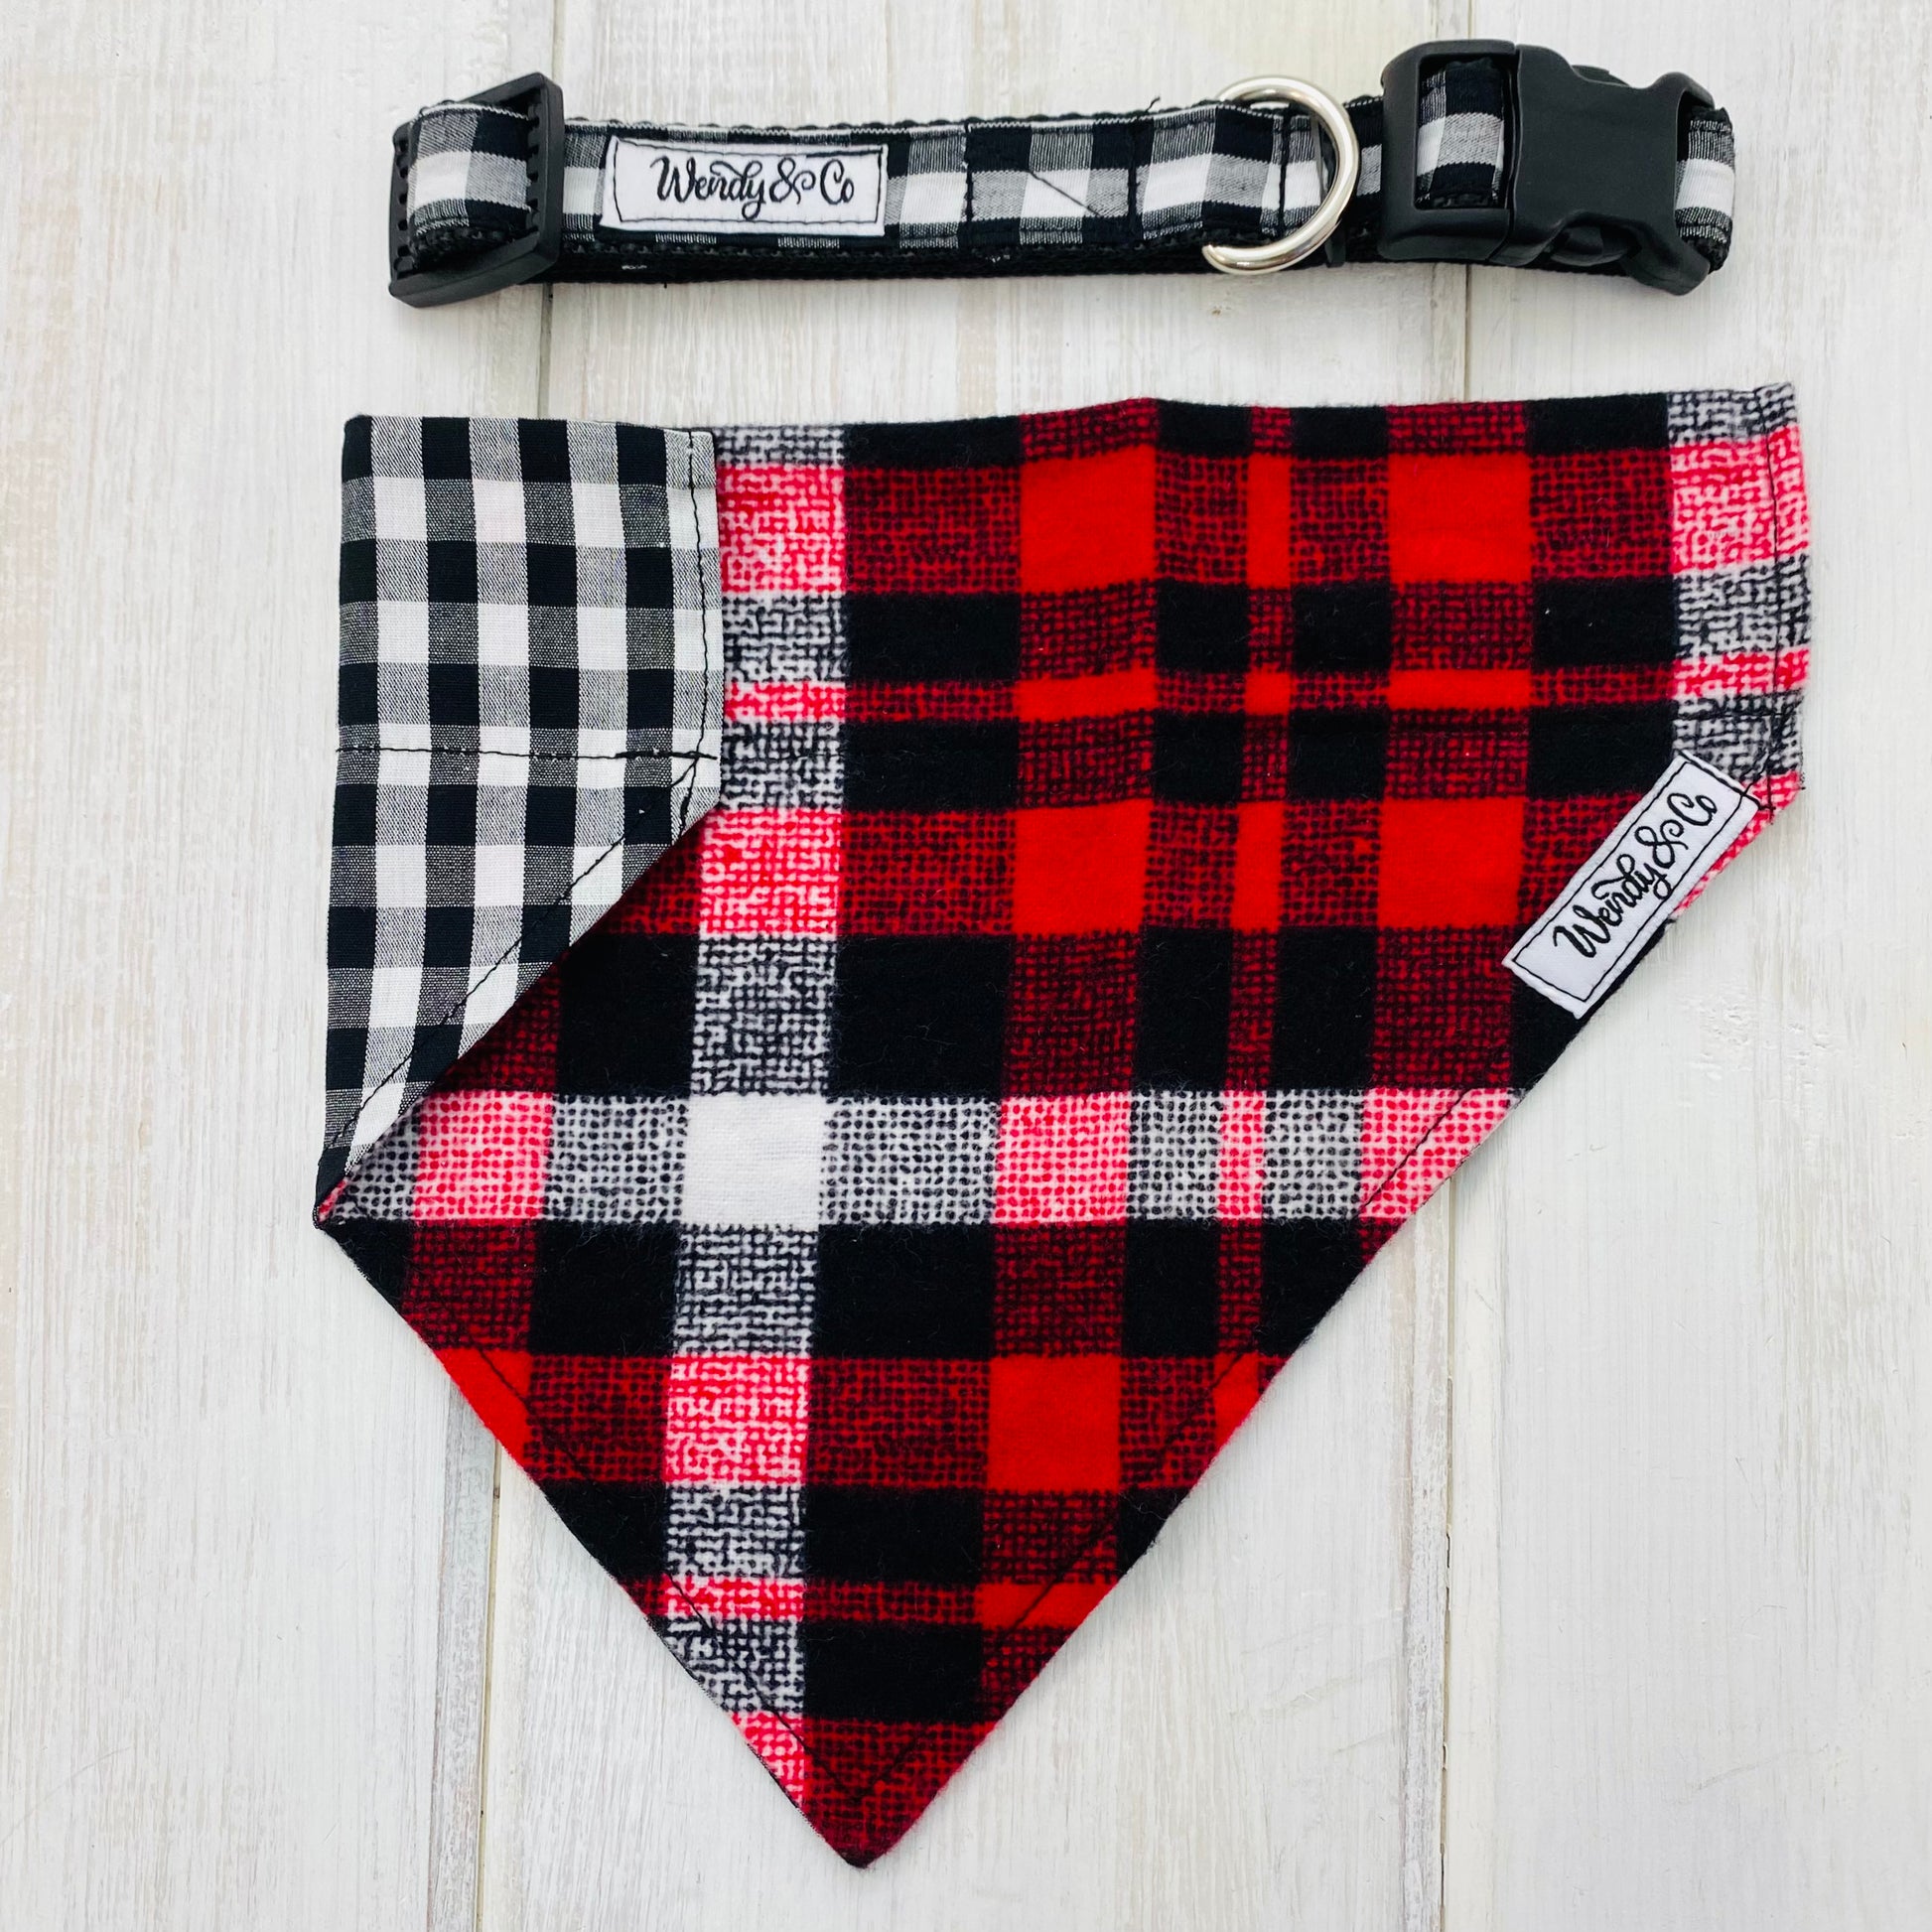 Over the collar dog bandana, reversible- black, red and white plaid to black and white check.